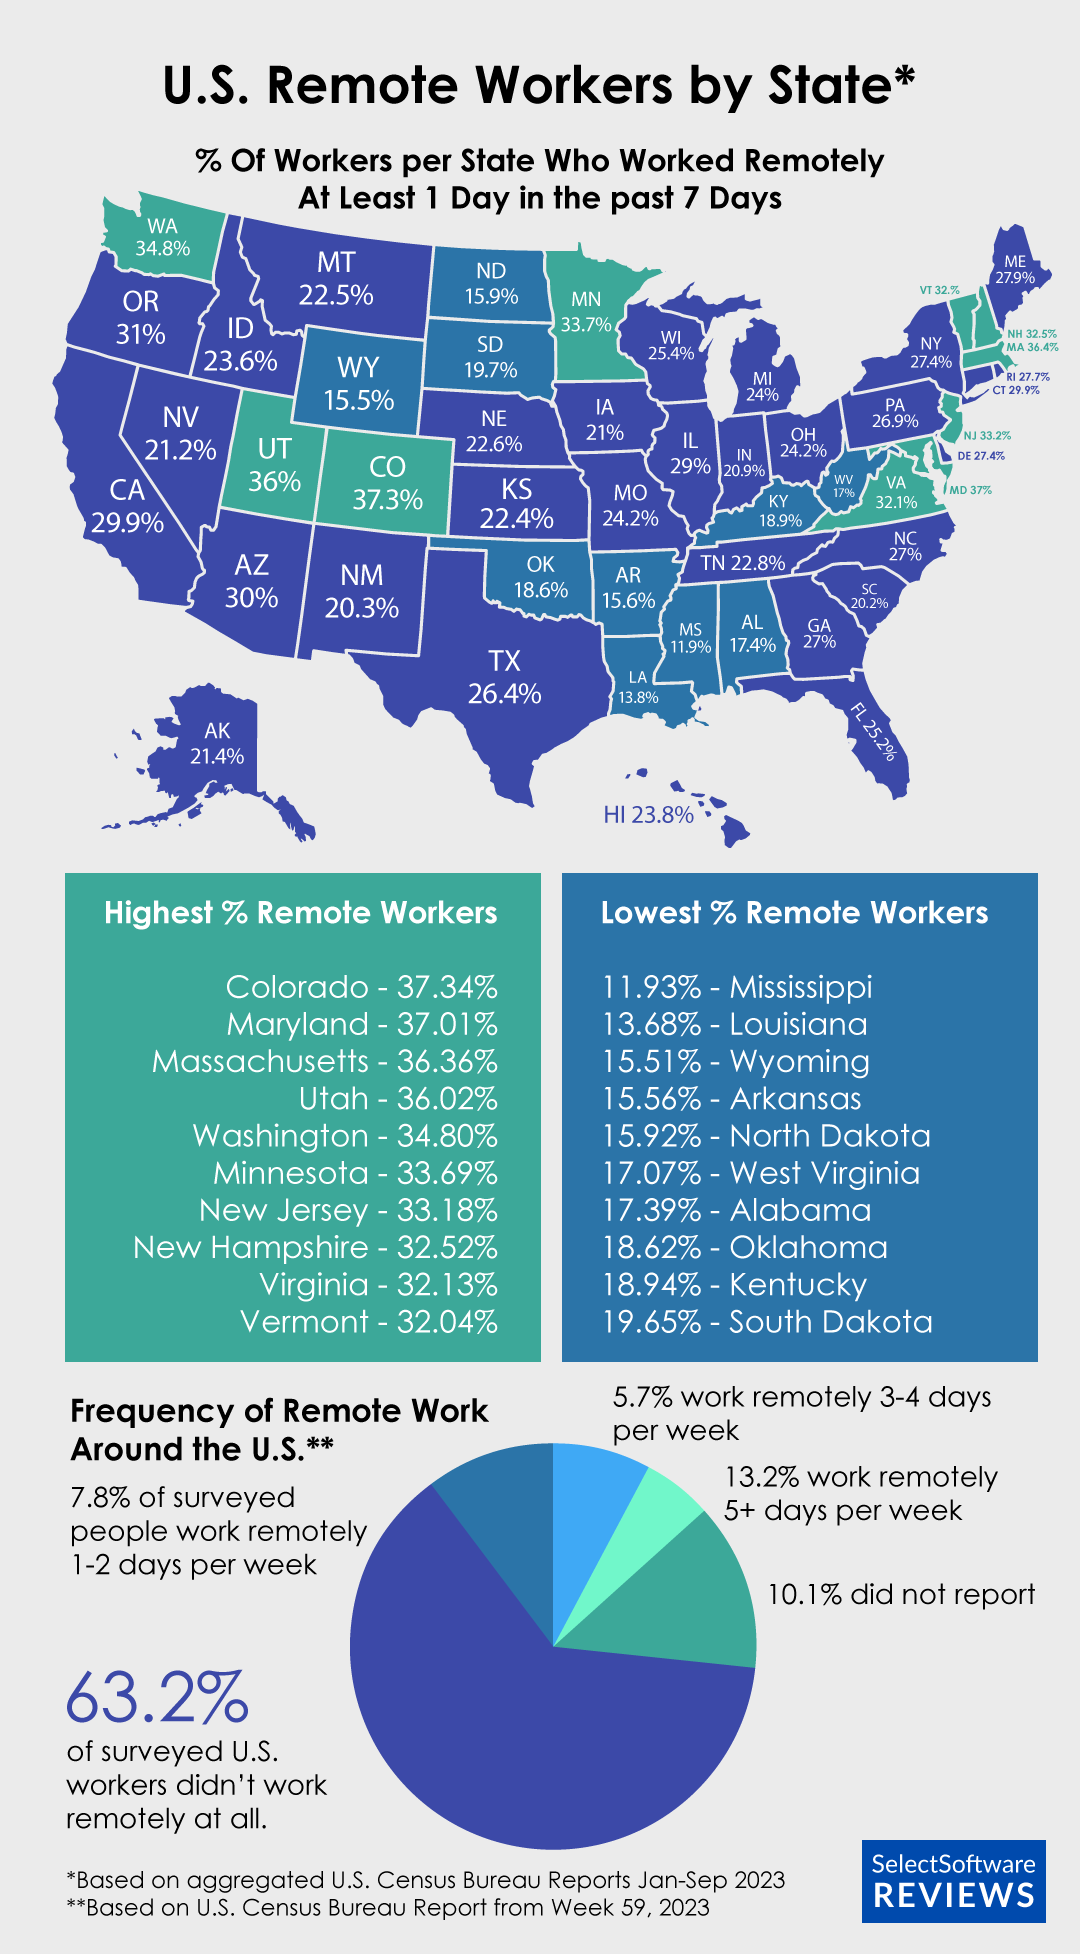 Map showing the ercetnage of remote workers by US state with highest and lowest 10 revealed